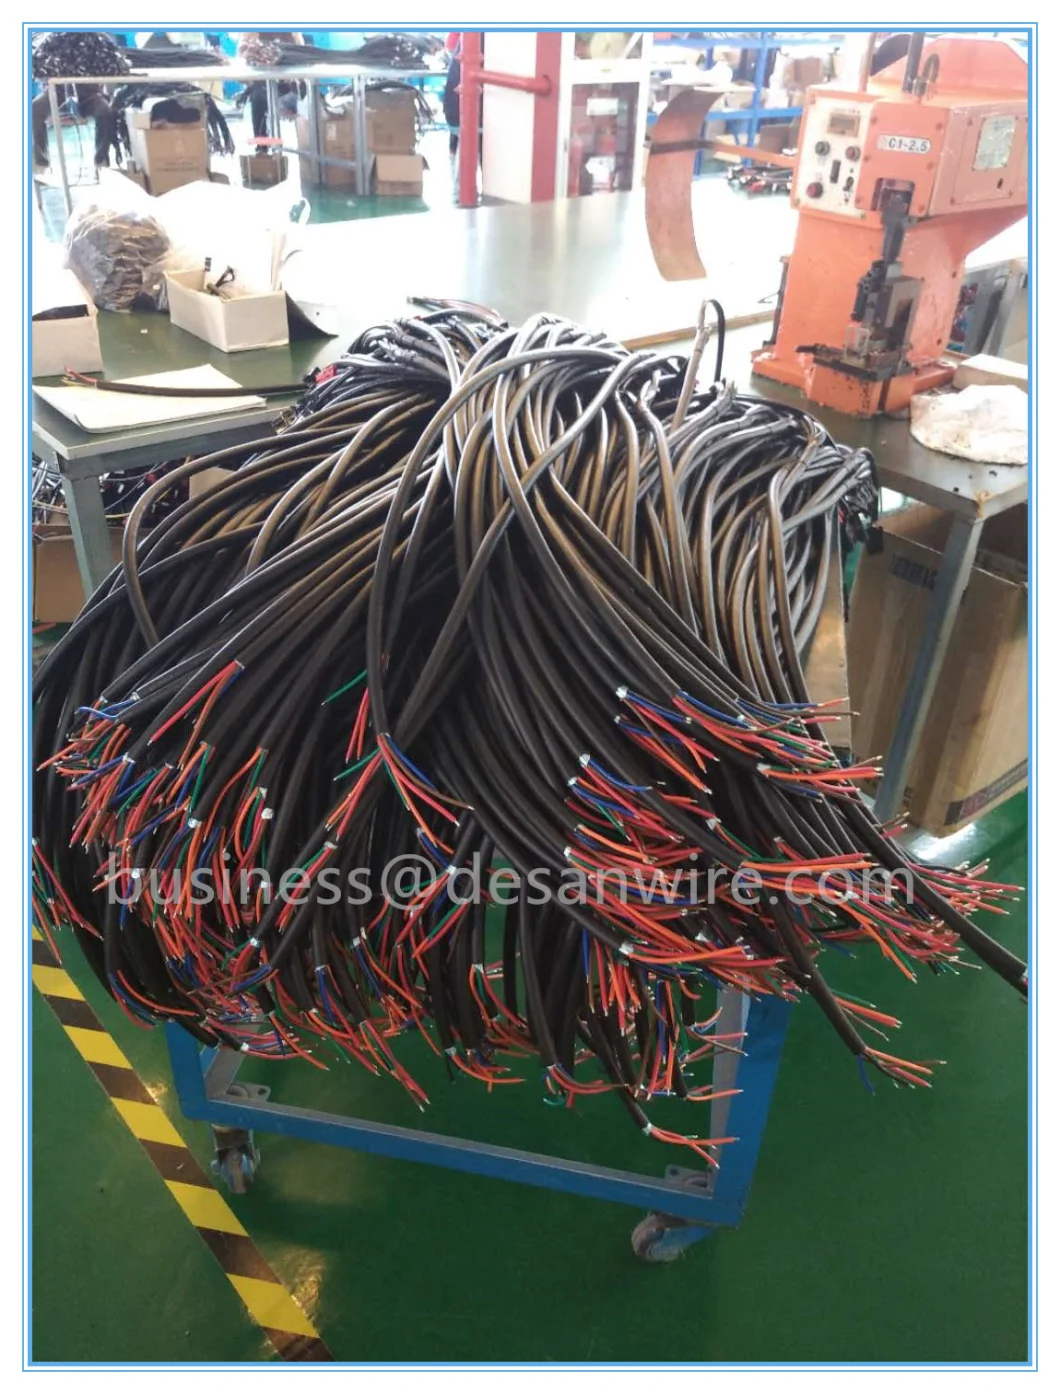 Custom Electrical Industrial Medical Cable Harness with Connector Automotive Wire Harness Wire